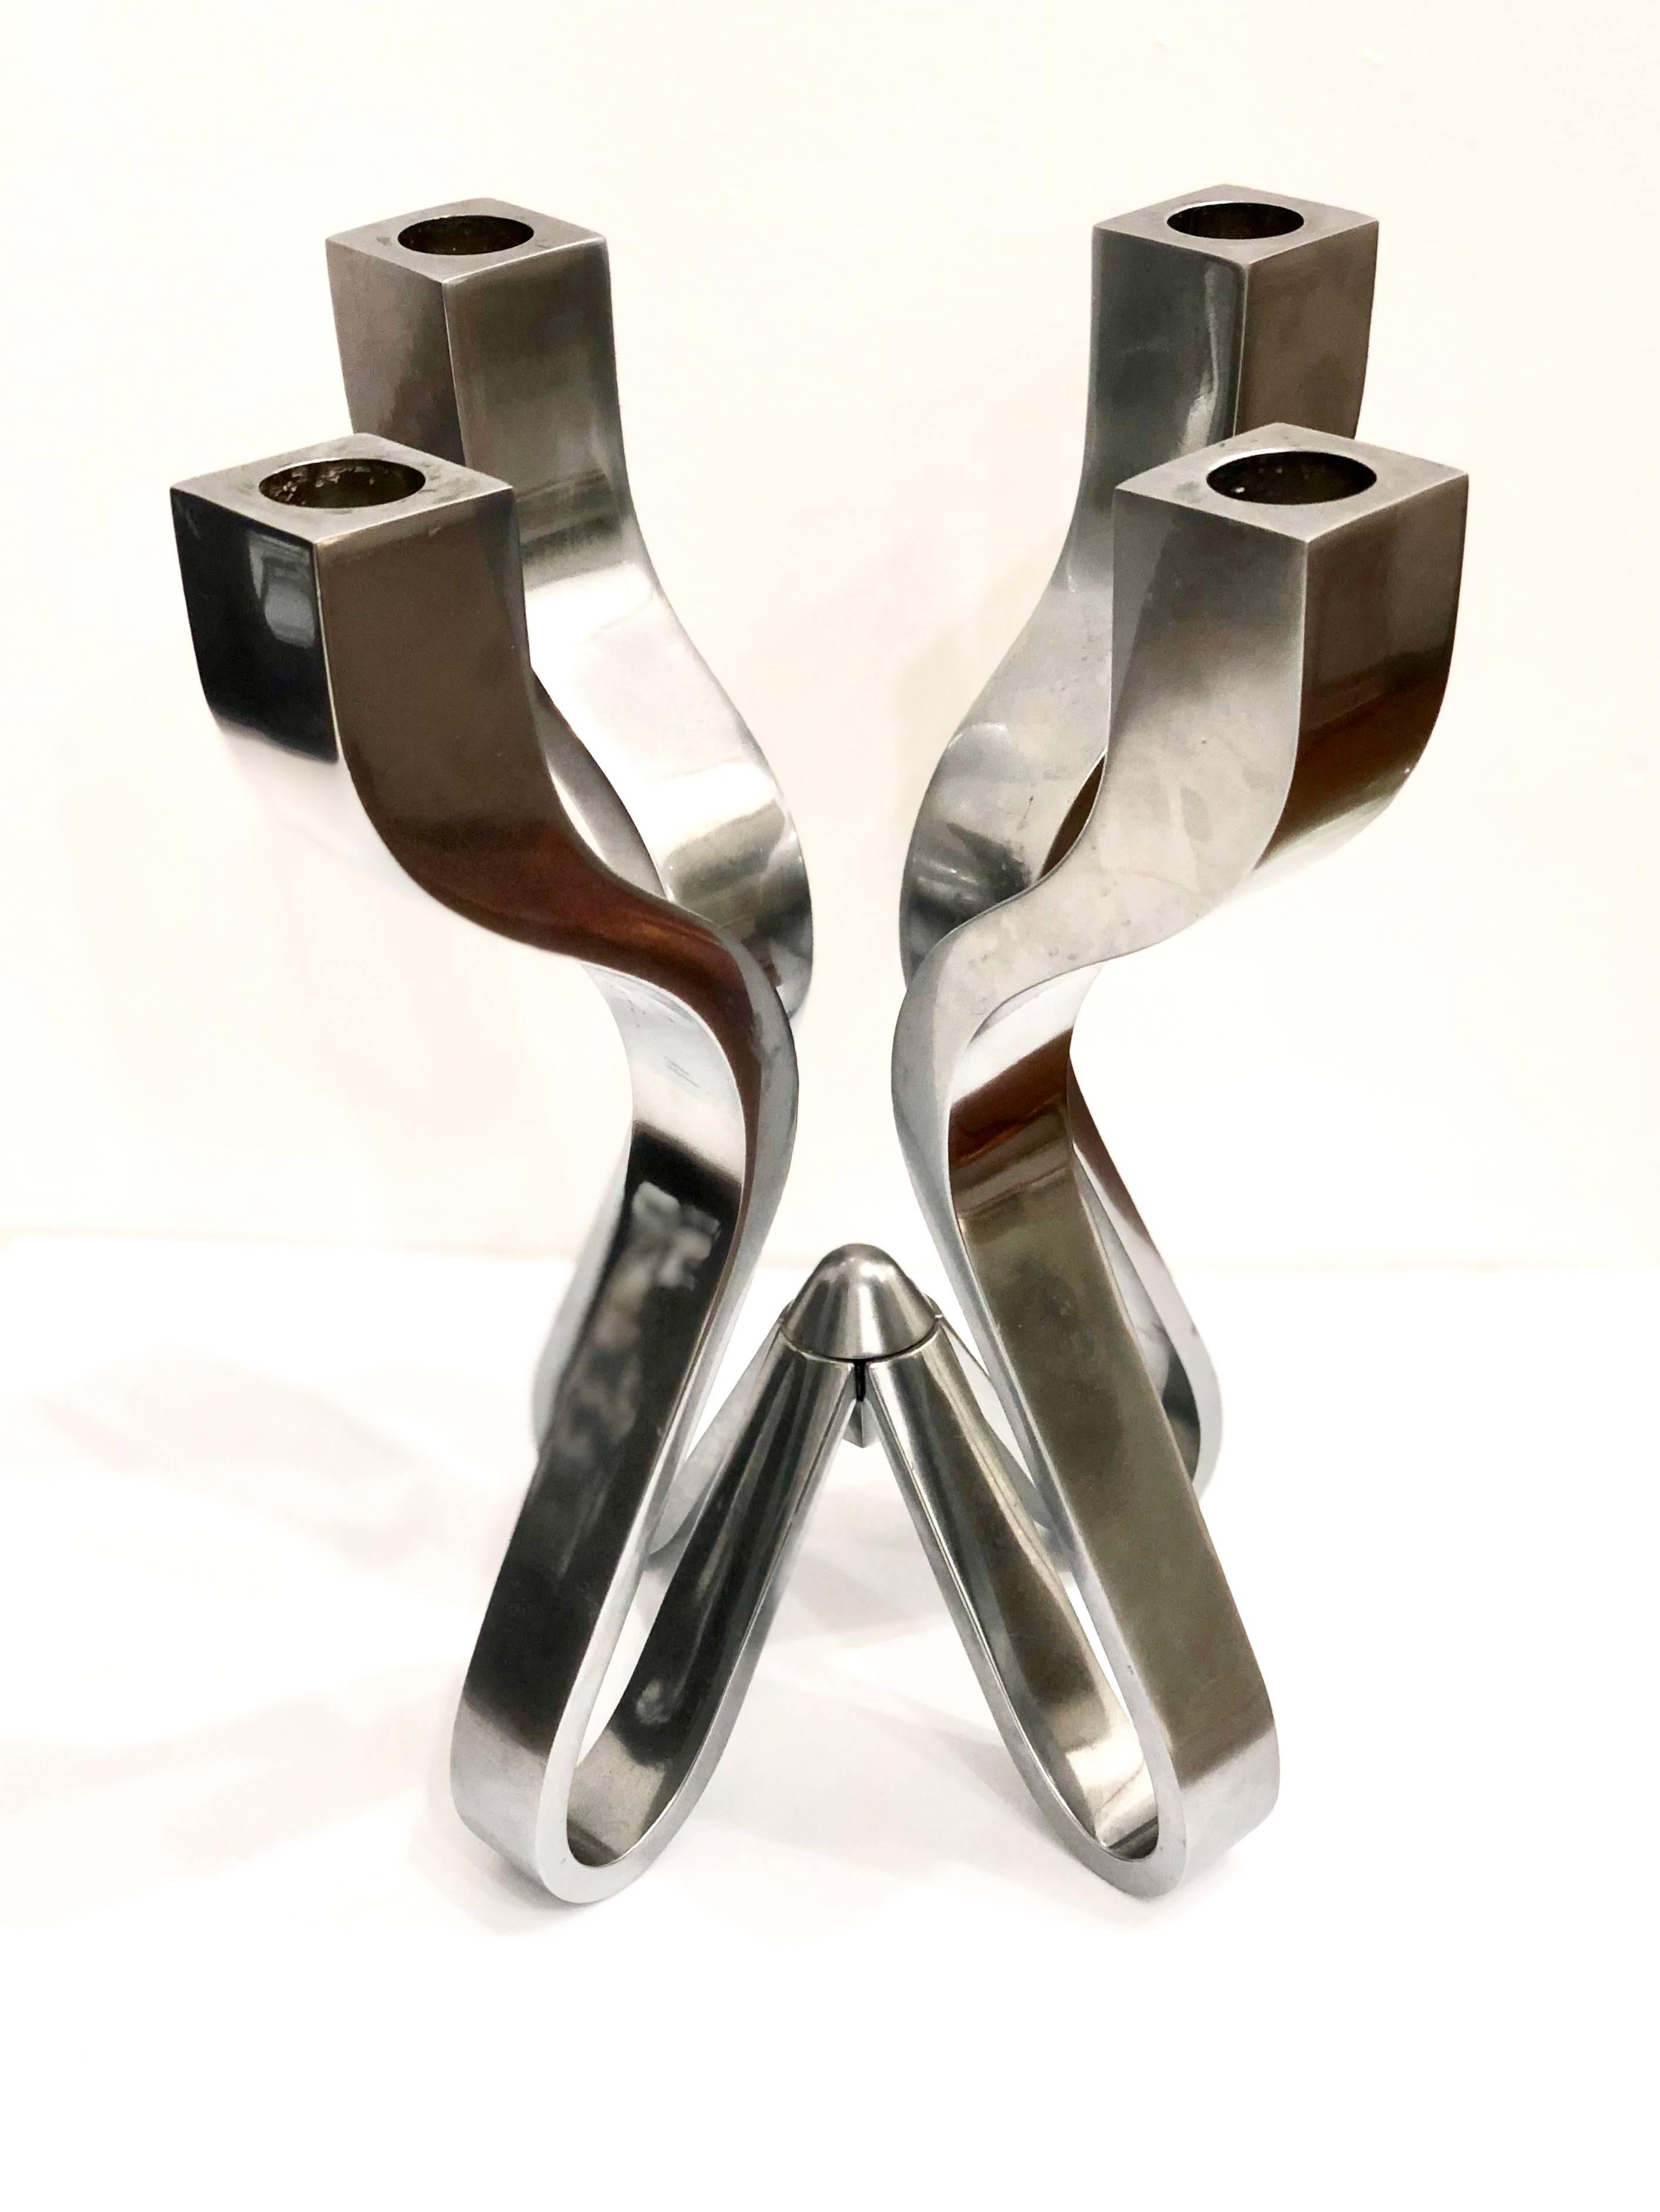 Striking candelabra. Described by their designer, Karim Rashid, as “sensual minimalism”, solid sleek awe-inspiring pieces of decorative art. Comprised of die-cast zinc with a matte chrome plating. Rashid has been deemed one of the most prolific